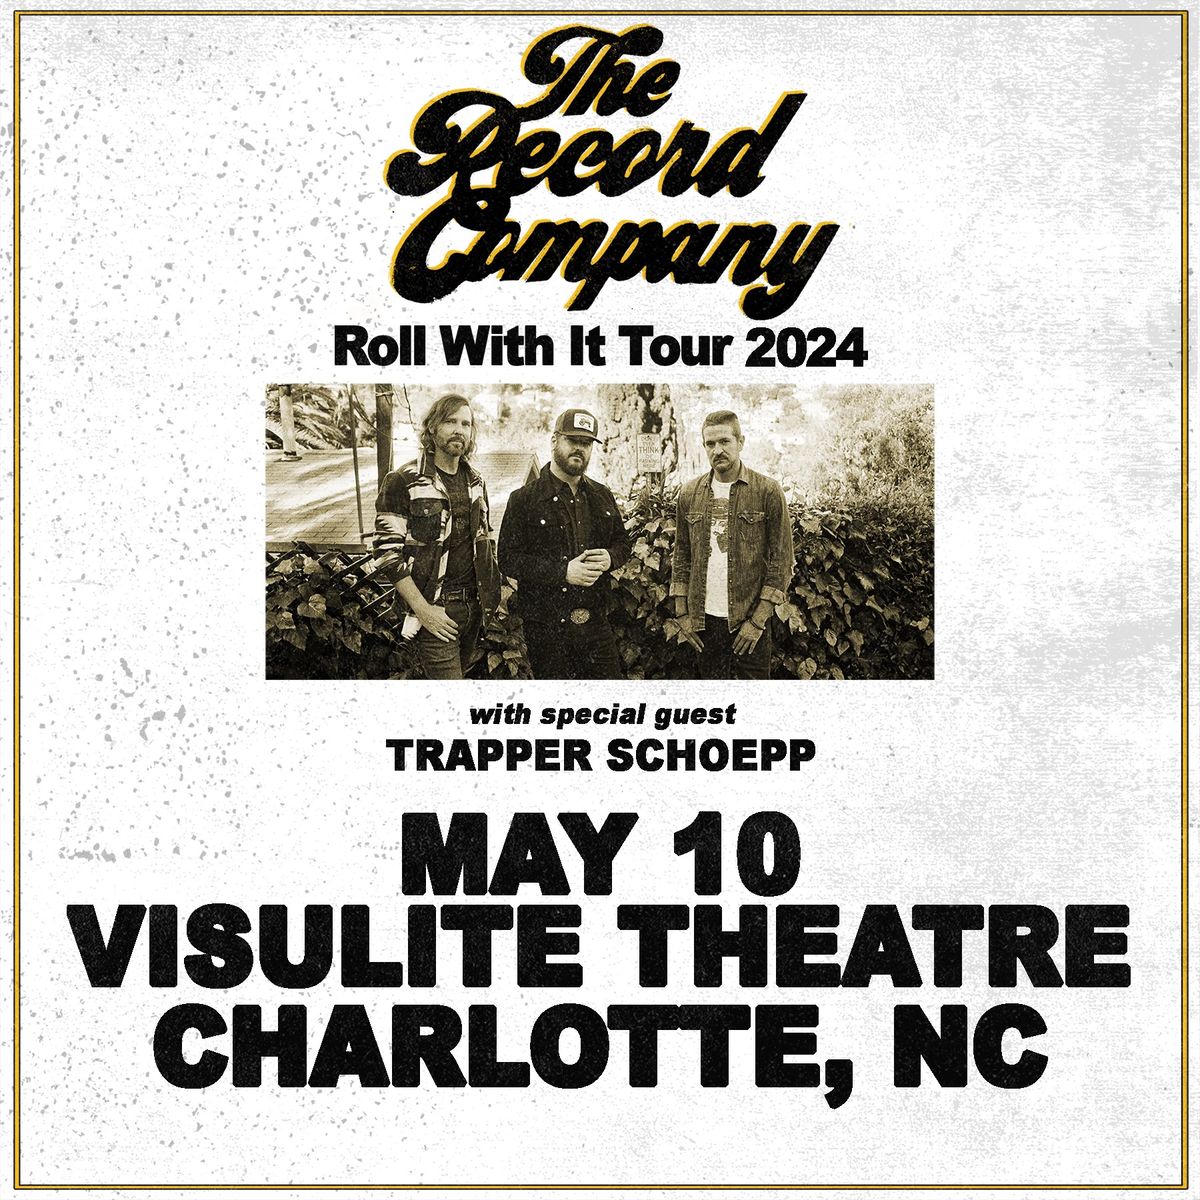 The Record Company - Roll With It Tour with Trapper Schoepp in Charlotte, NC